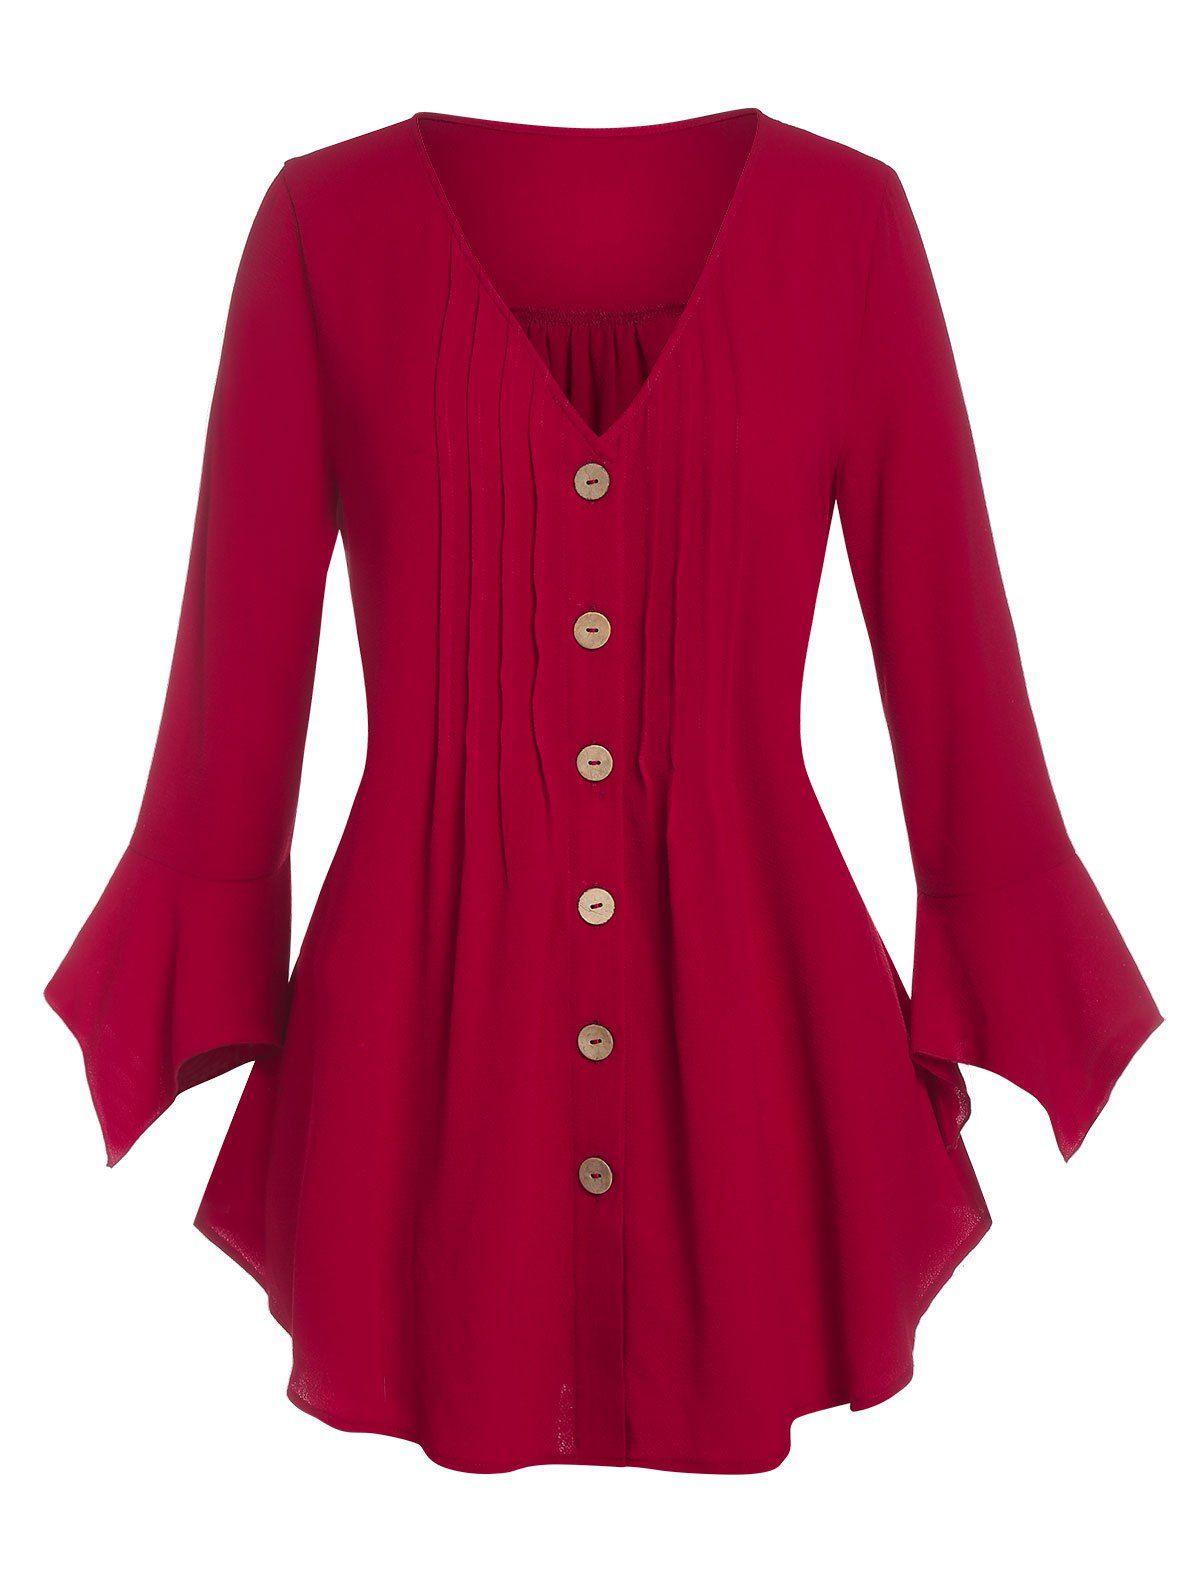 Plus Size Ruffle Cuff Pintuck Button Up Blouse - DEEP RED 2X